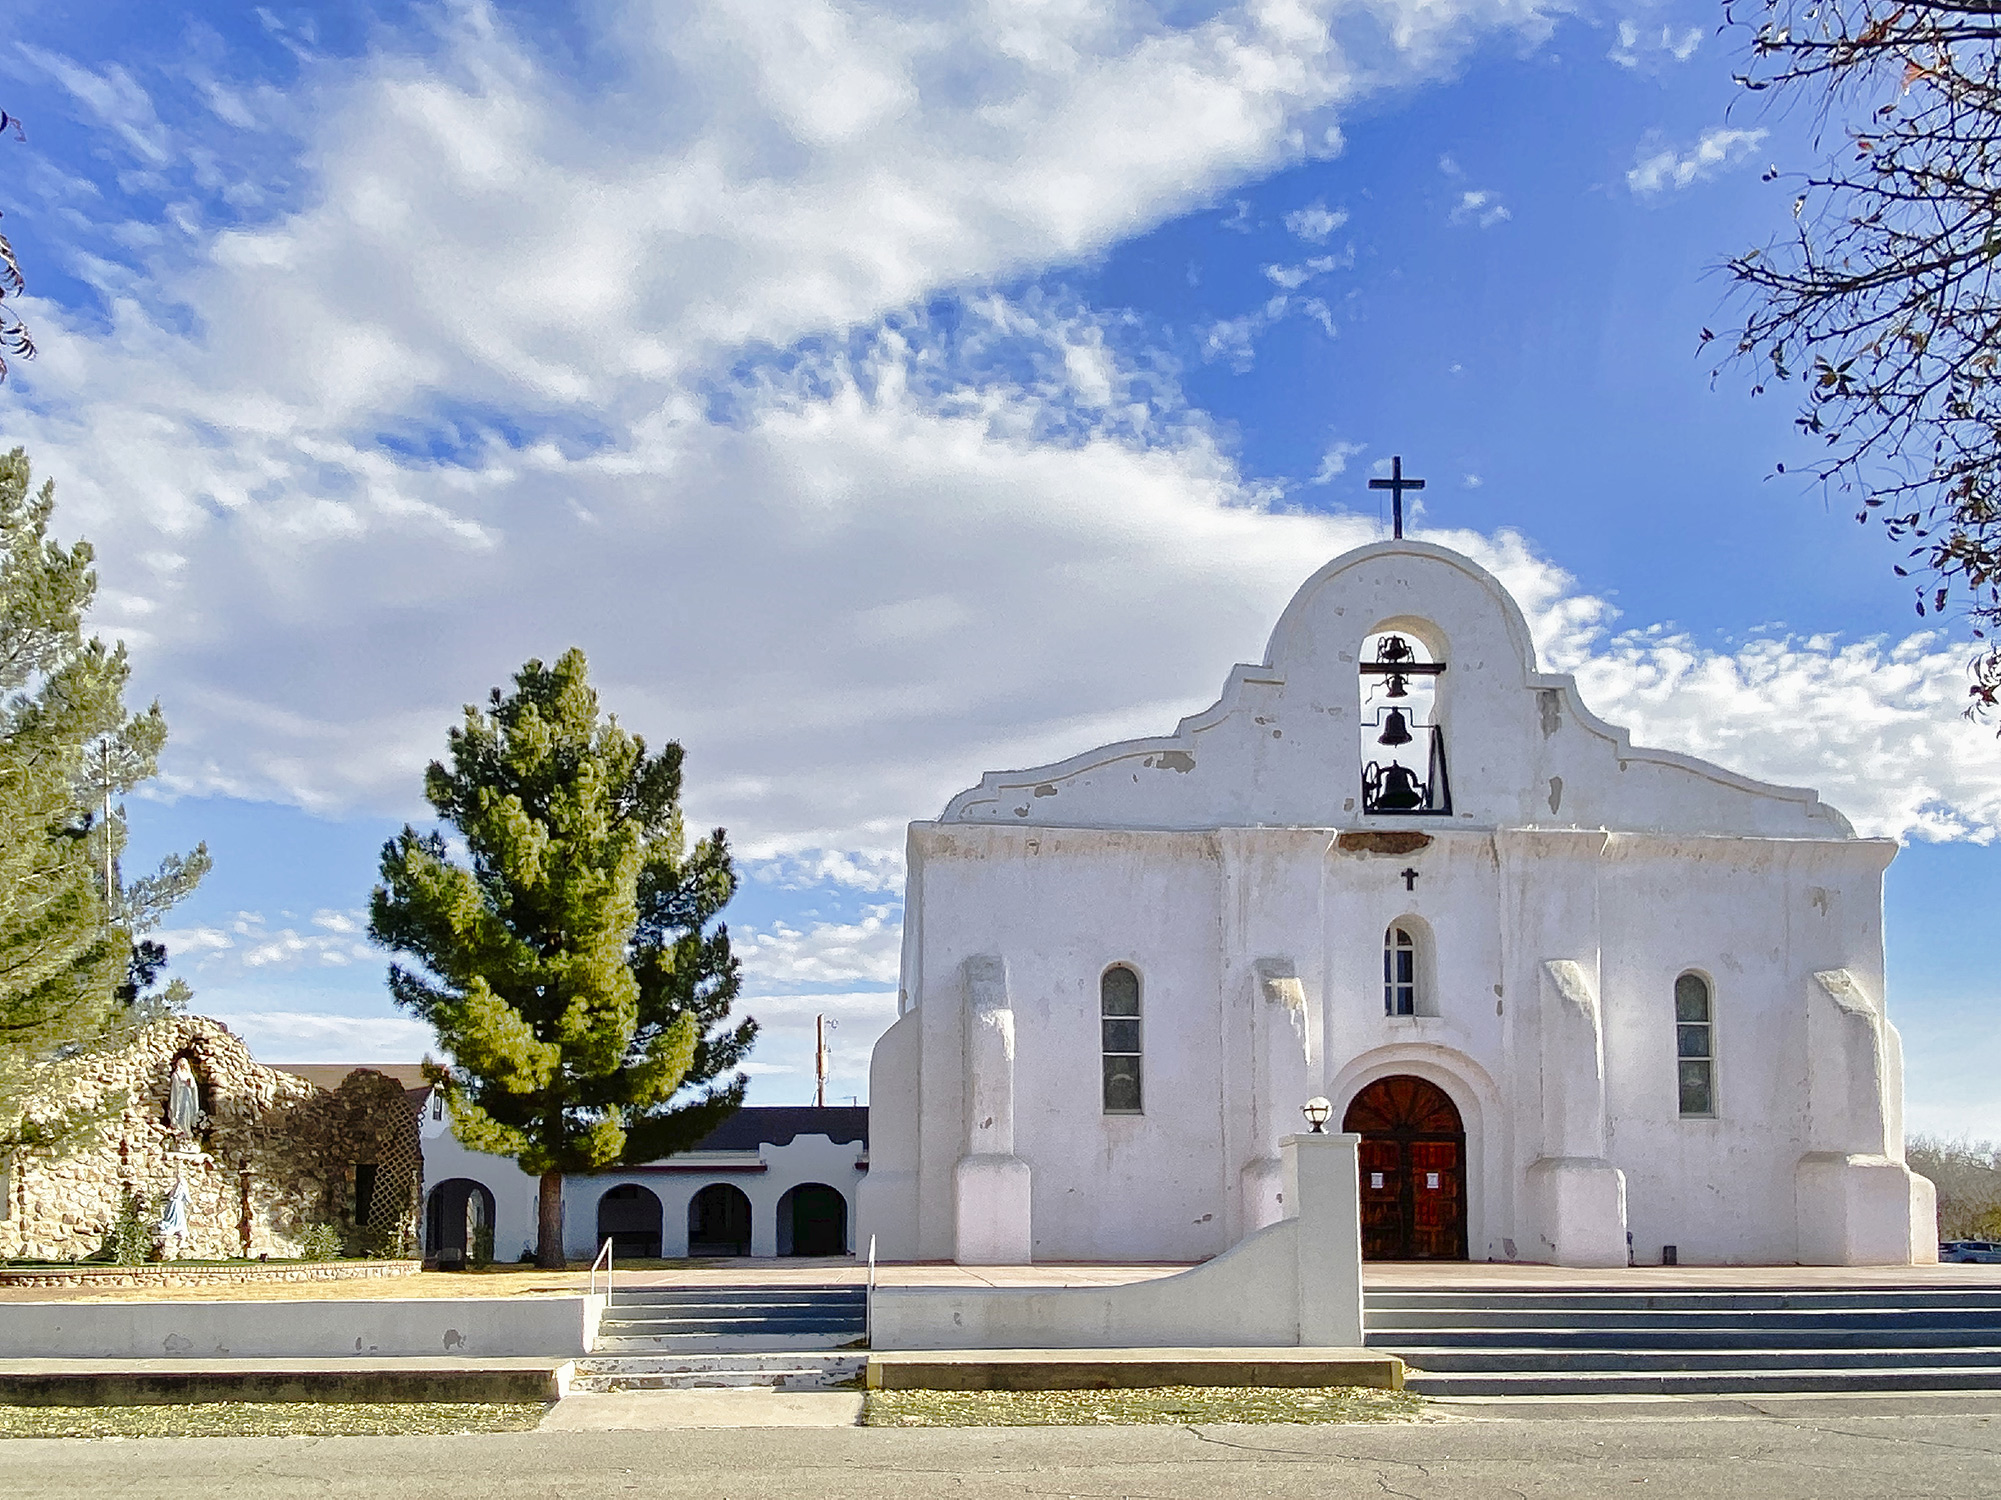 The San Elizario presidio chapel stands next to tall trees and a sunny but partly cloudy sky